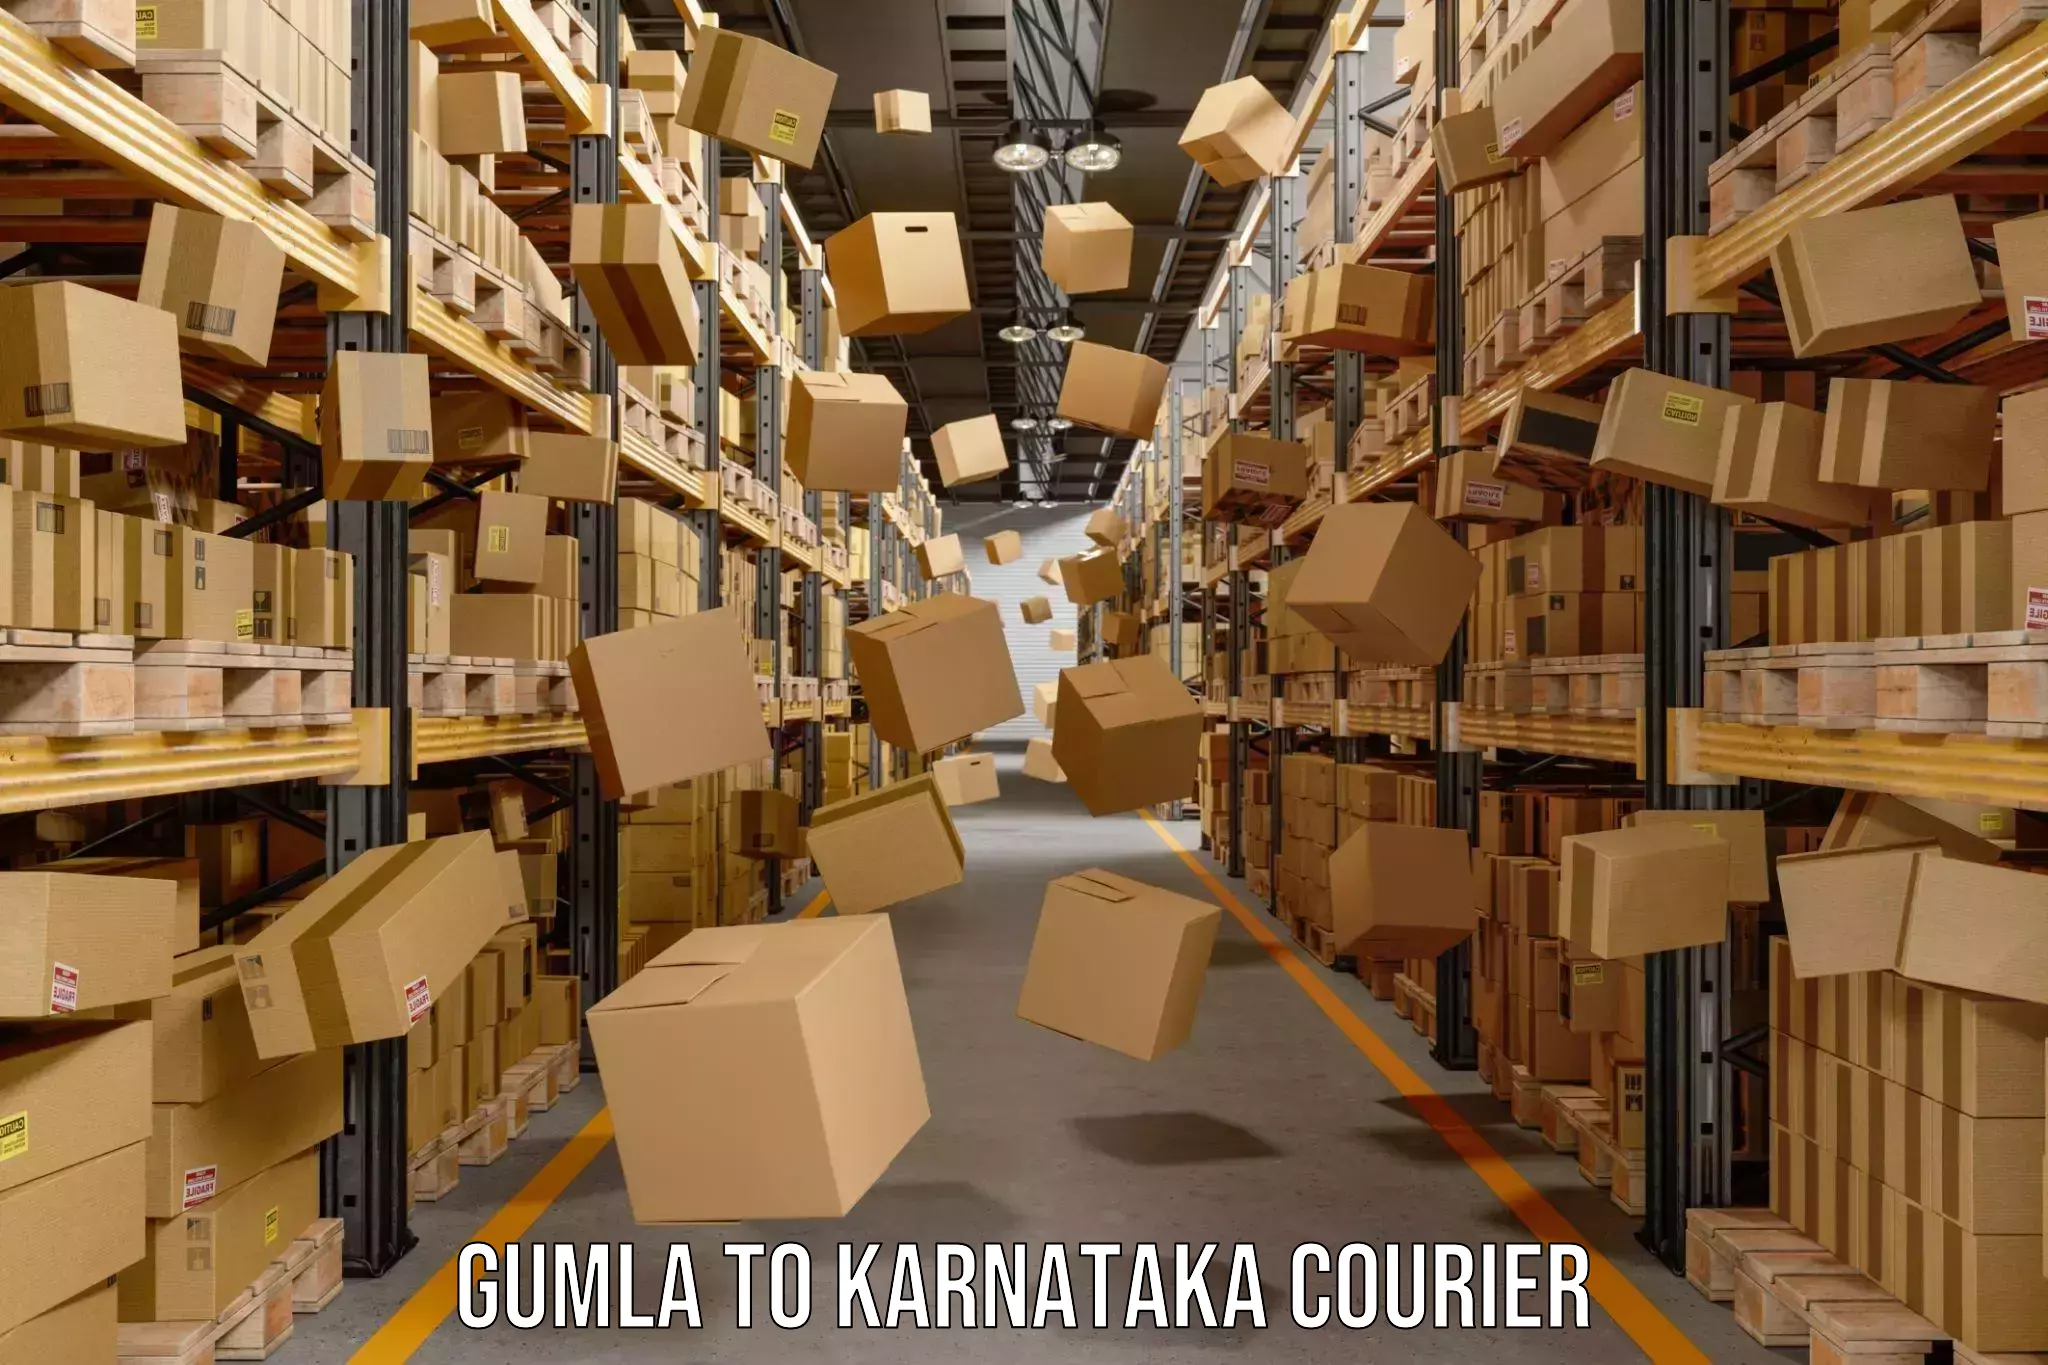 Express package handling Gumla to Manipal Academy of Higher Education